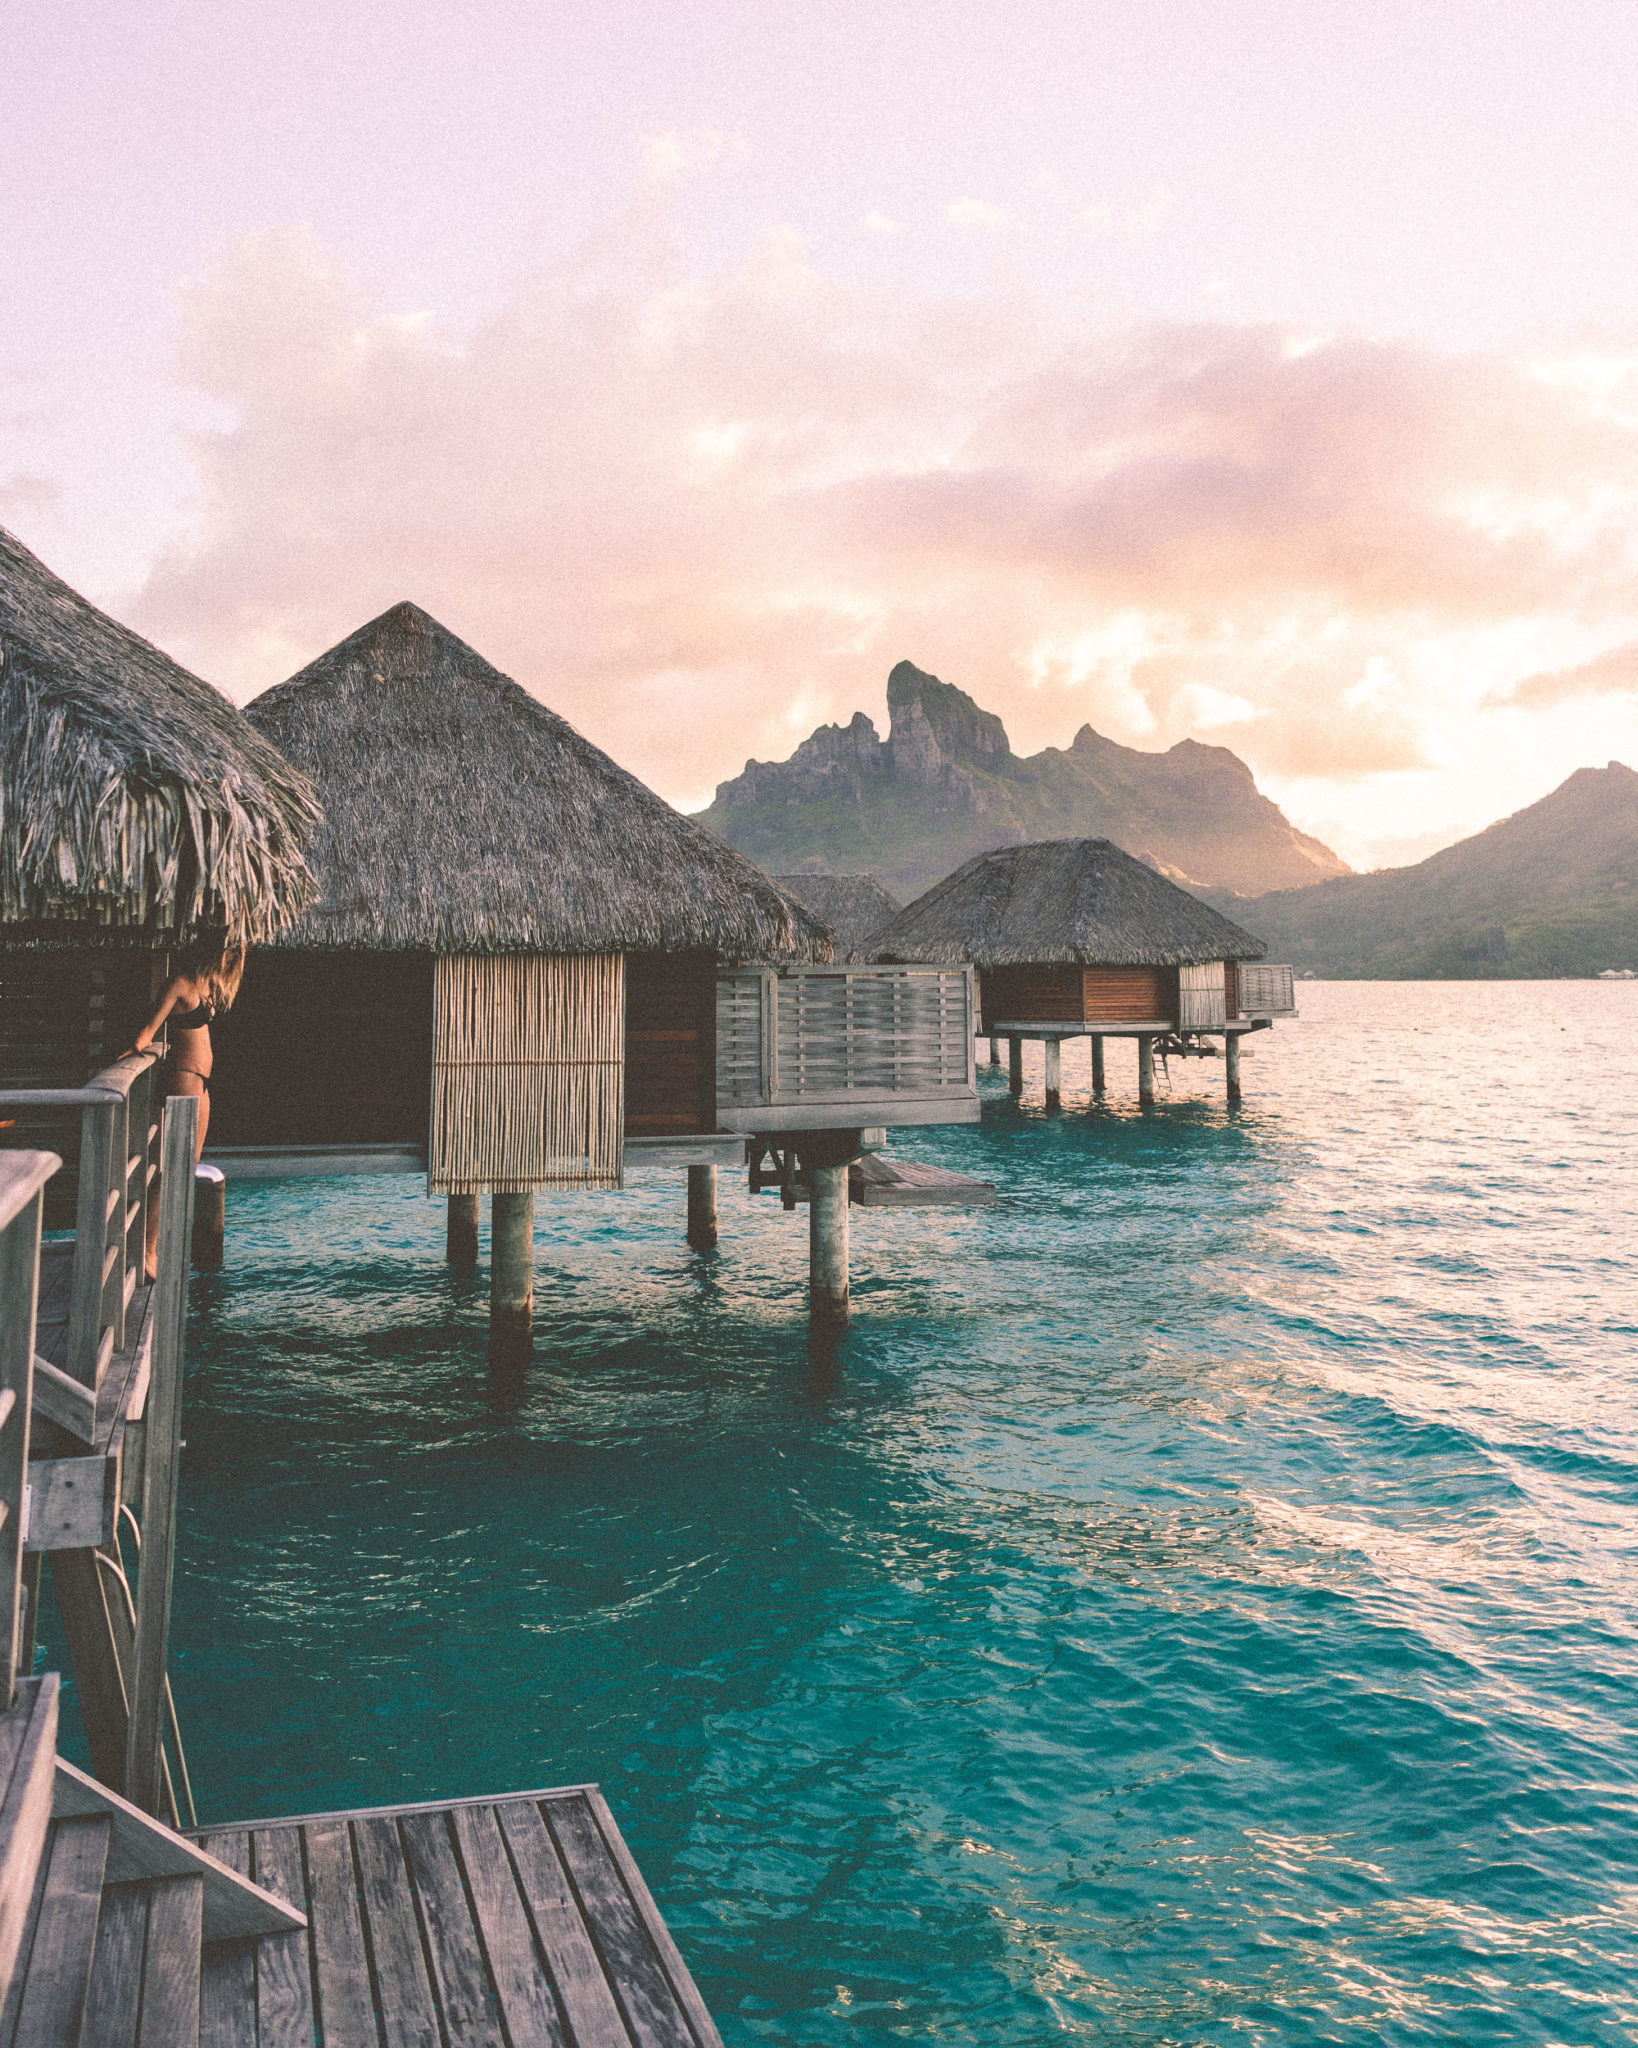 Sunset from our overwater bungalow at Four Seasons Bora Bora for our honeymoon via @finduslost